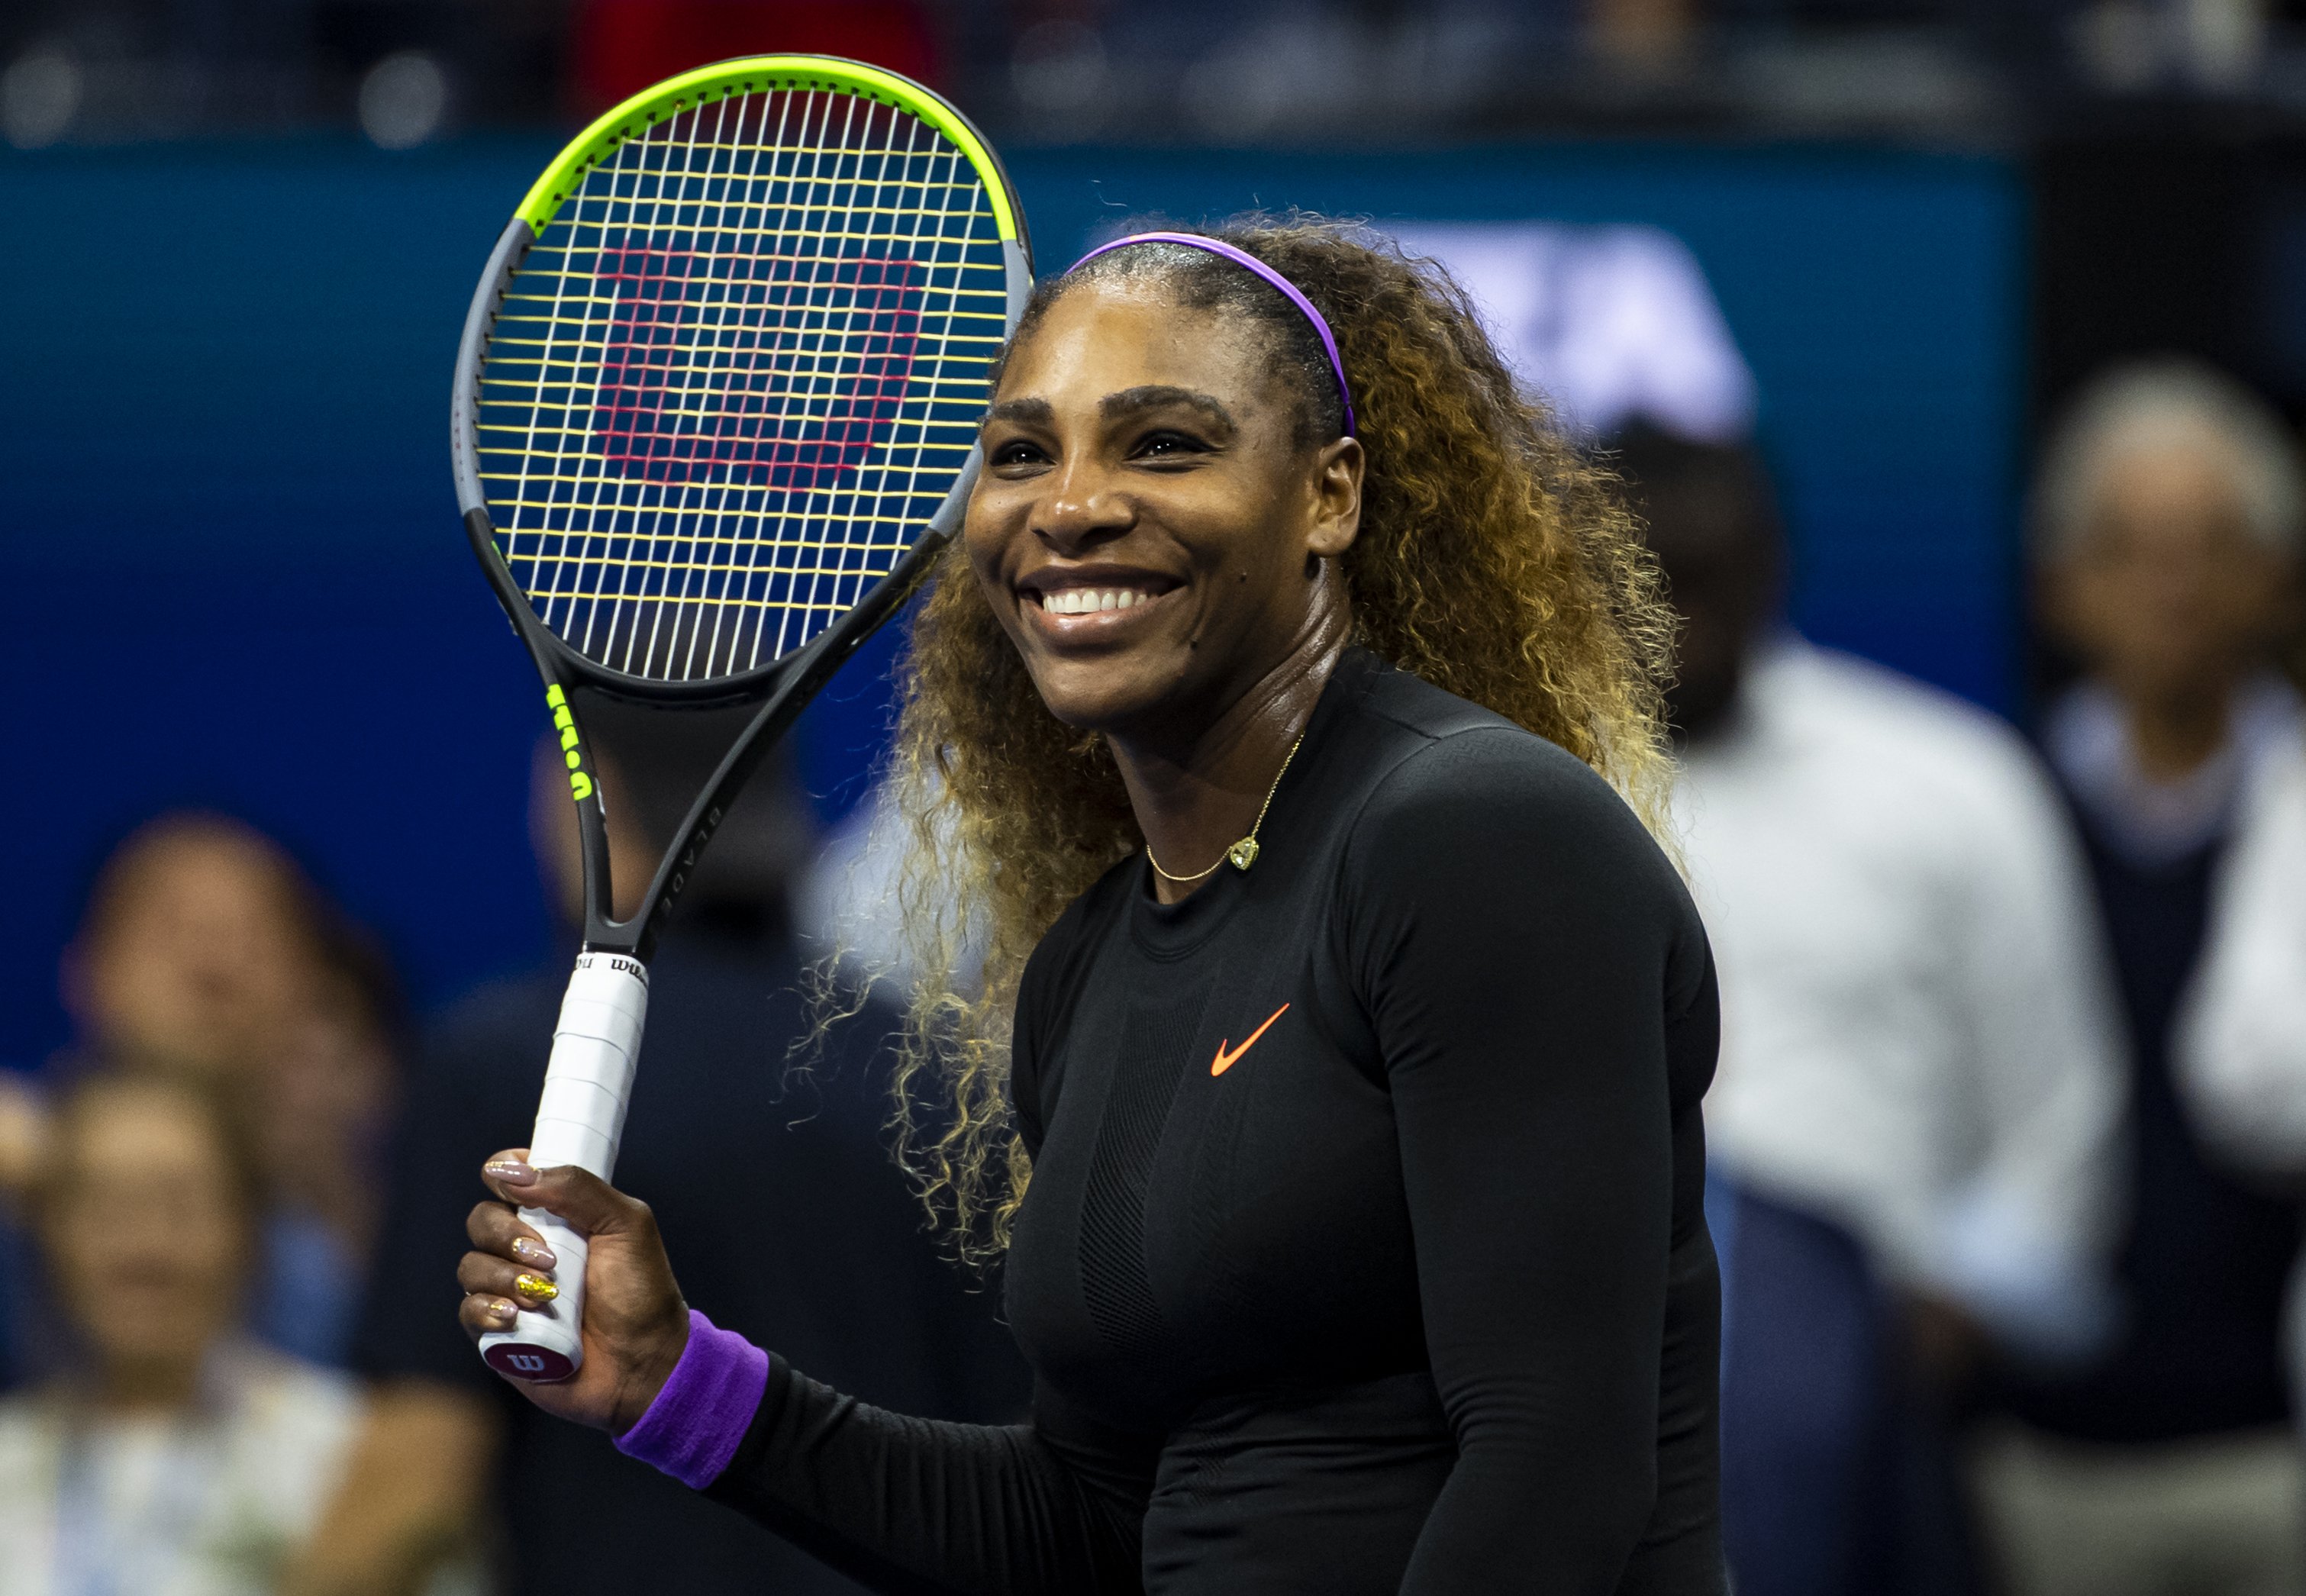 Serena Williams at the USTA Billie Jean King National Tennis Center on September 05, 2019 in New York City.| Source: Getty Images